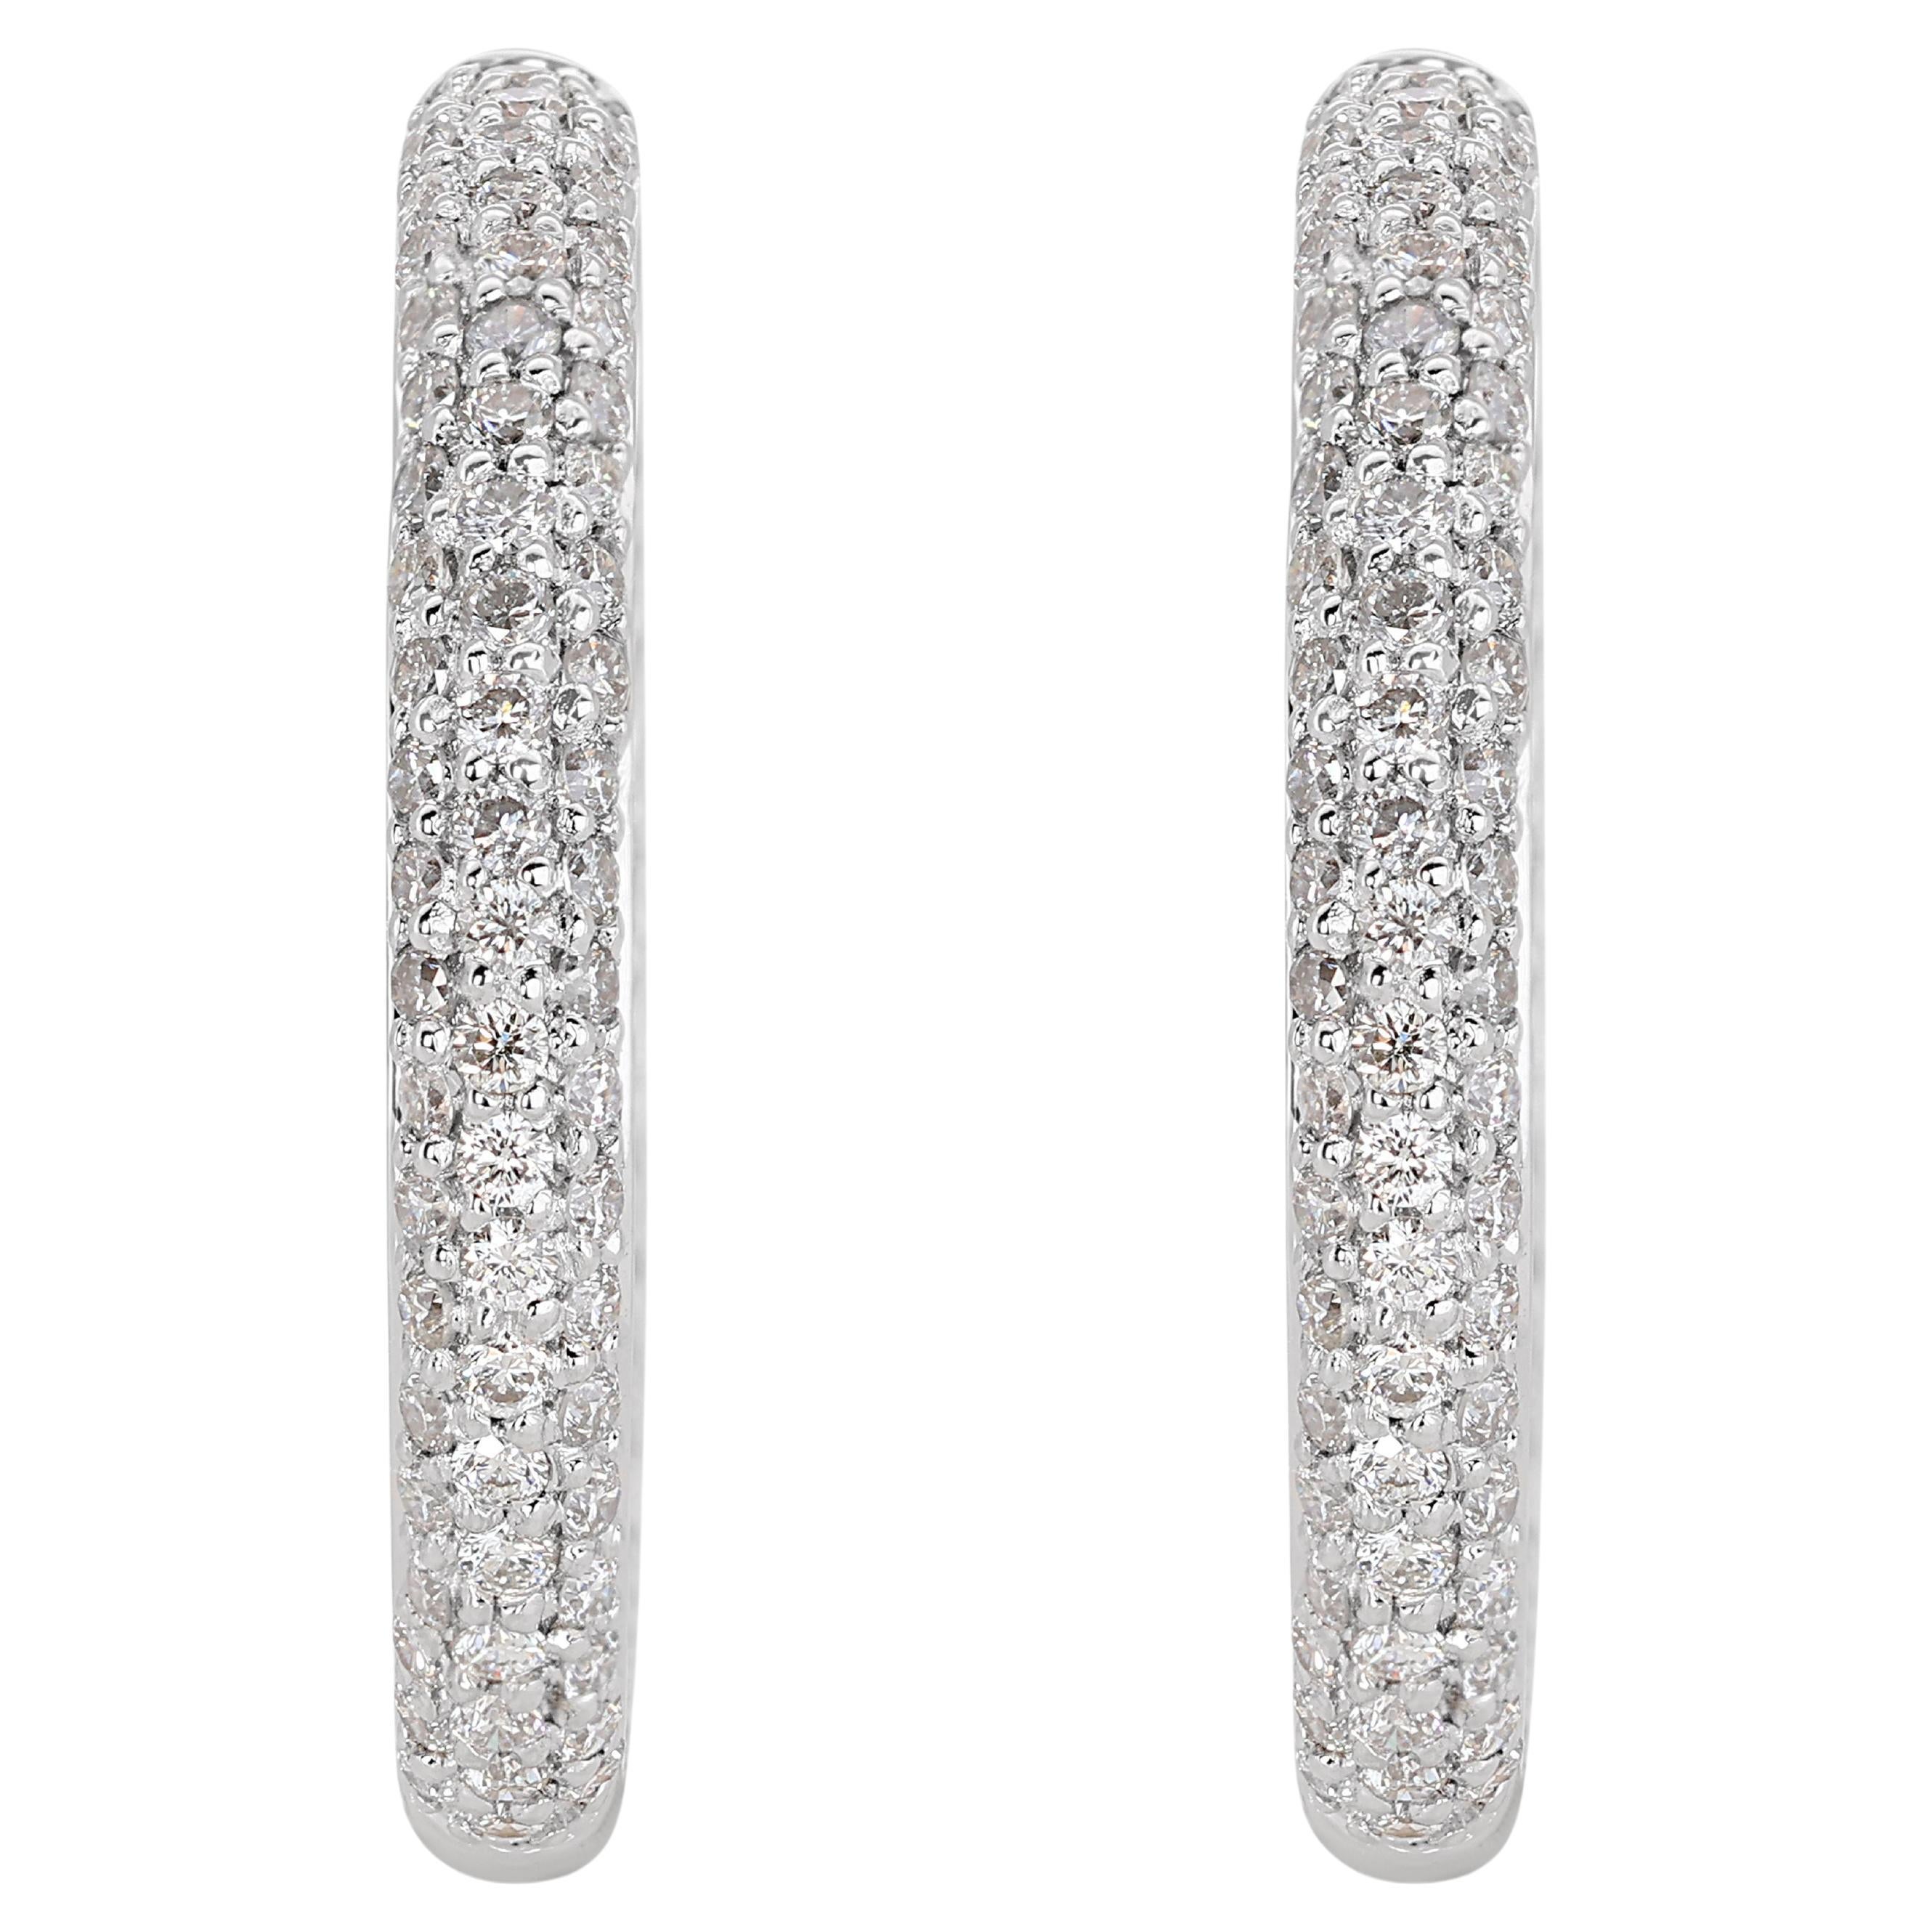 Exquisite 1.15ct Hoop Diamond Earrings set in 18K White Gold For Sale